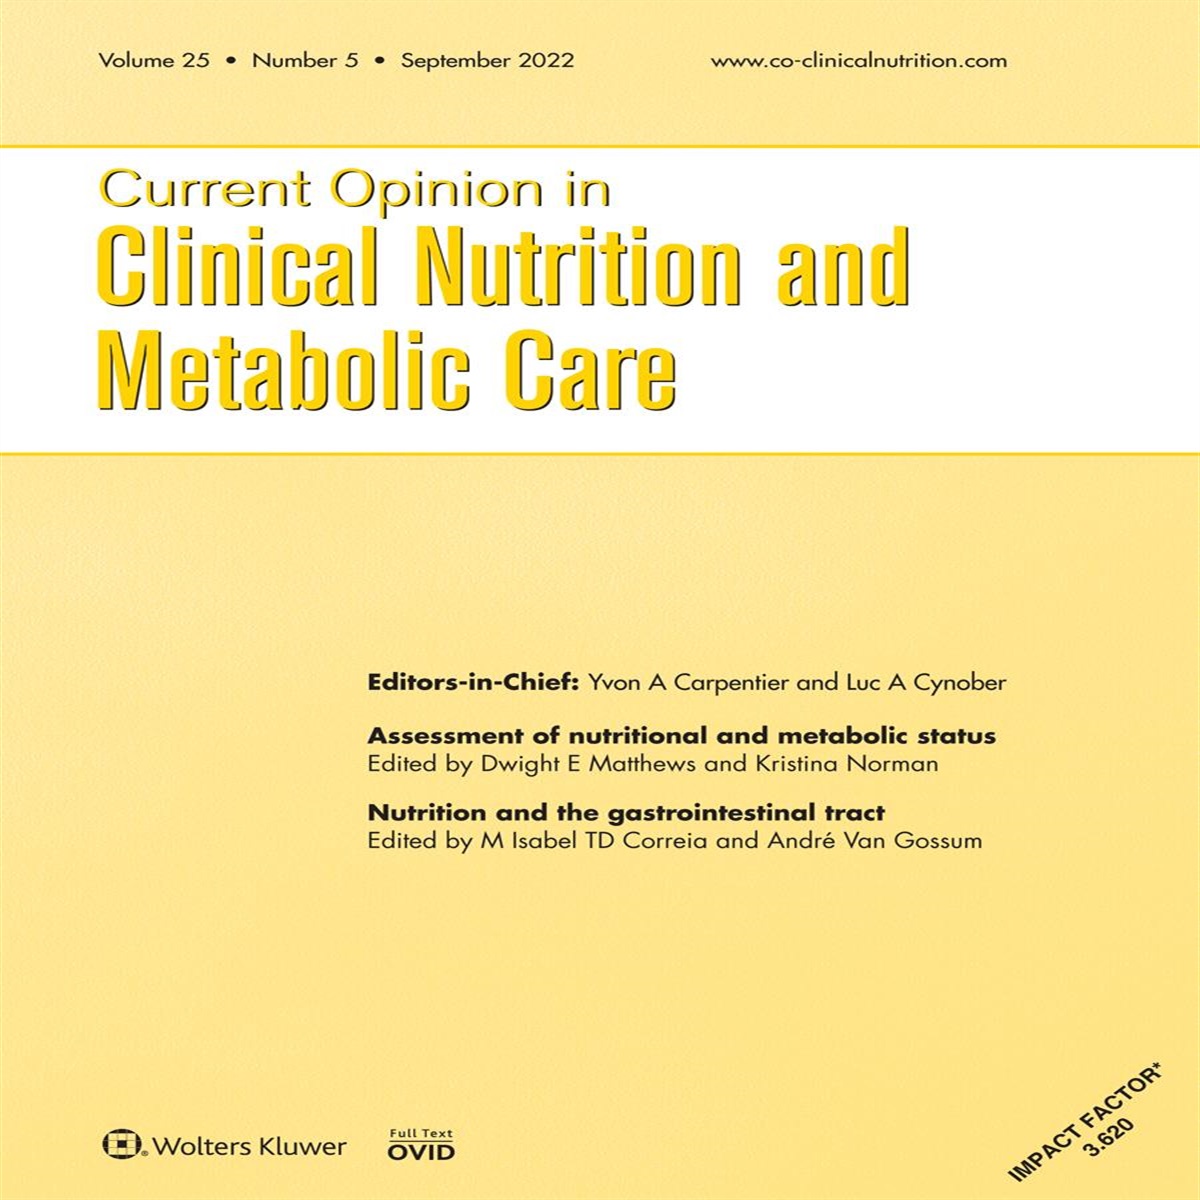 Editorial: Nutrition and the gastrointestinal tract